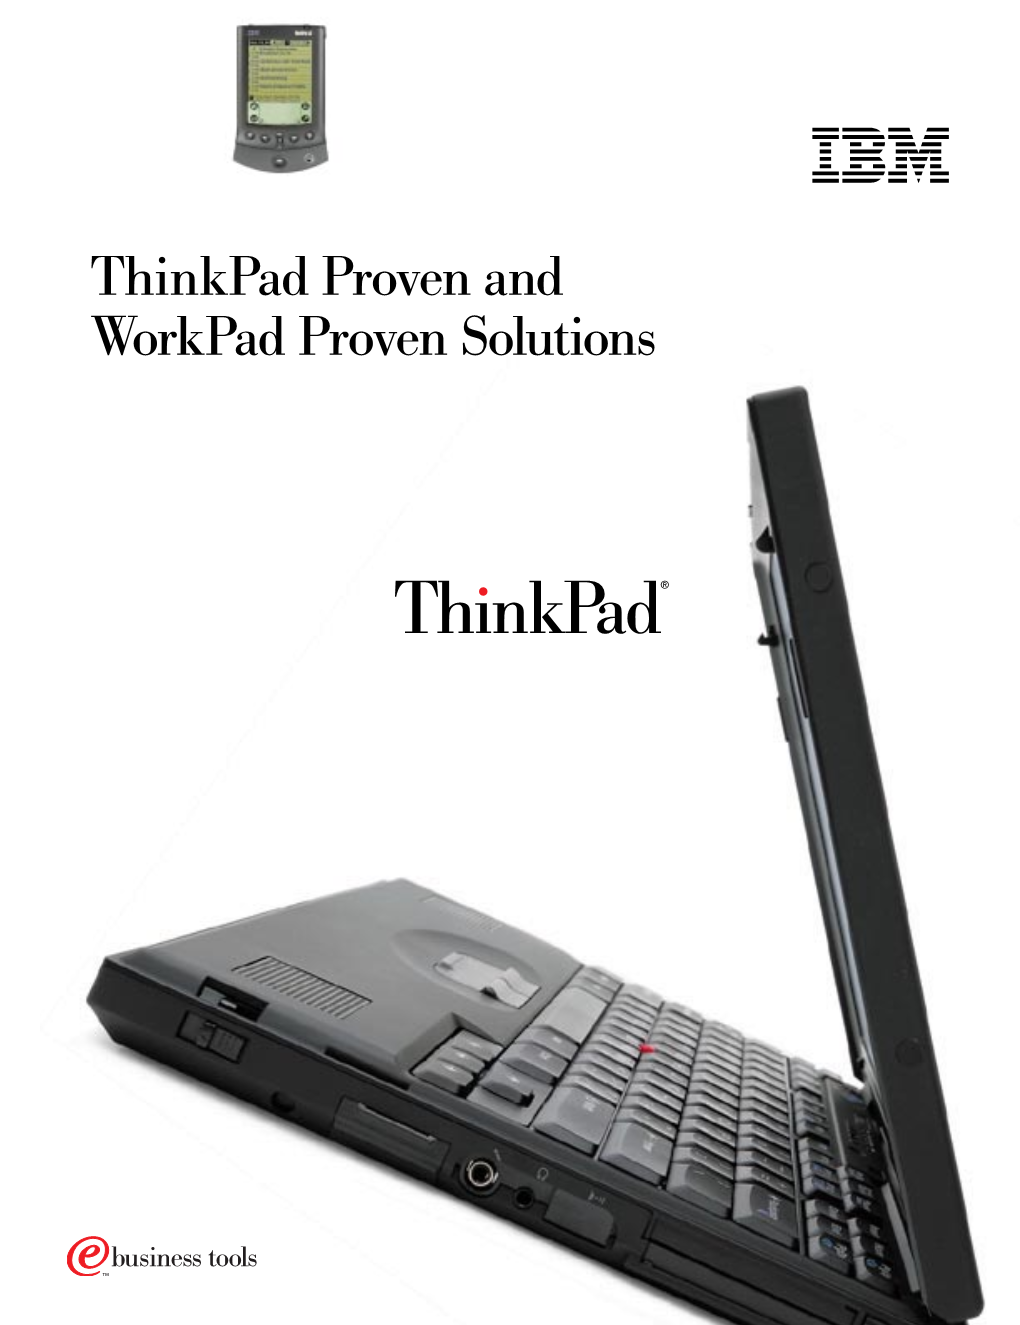 Thinkpad Proven and Workpad Proven Solutions